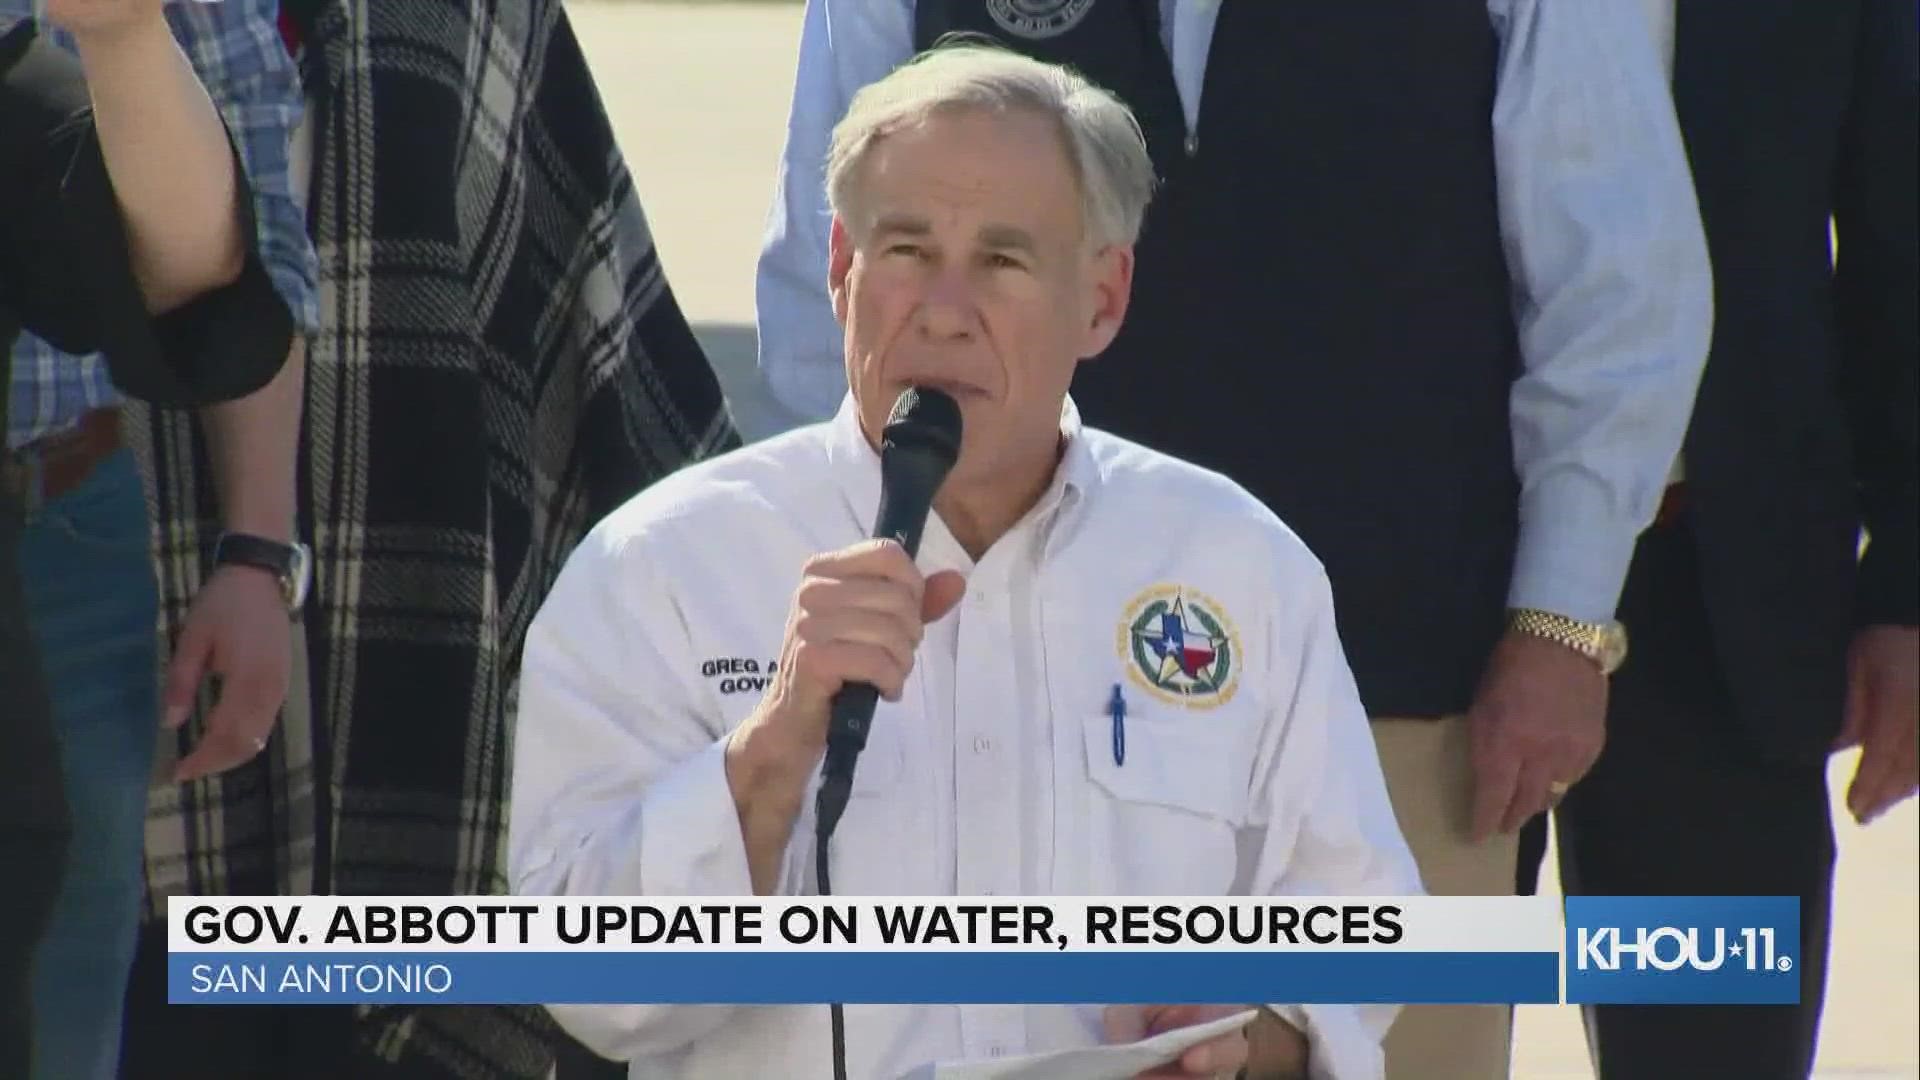 On Sunday, Feb. 21, 2021, Texas Gov. Greg Abbott provided an update on the state's efforts to provide water and other resources to communities across Texas.